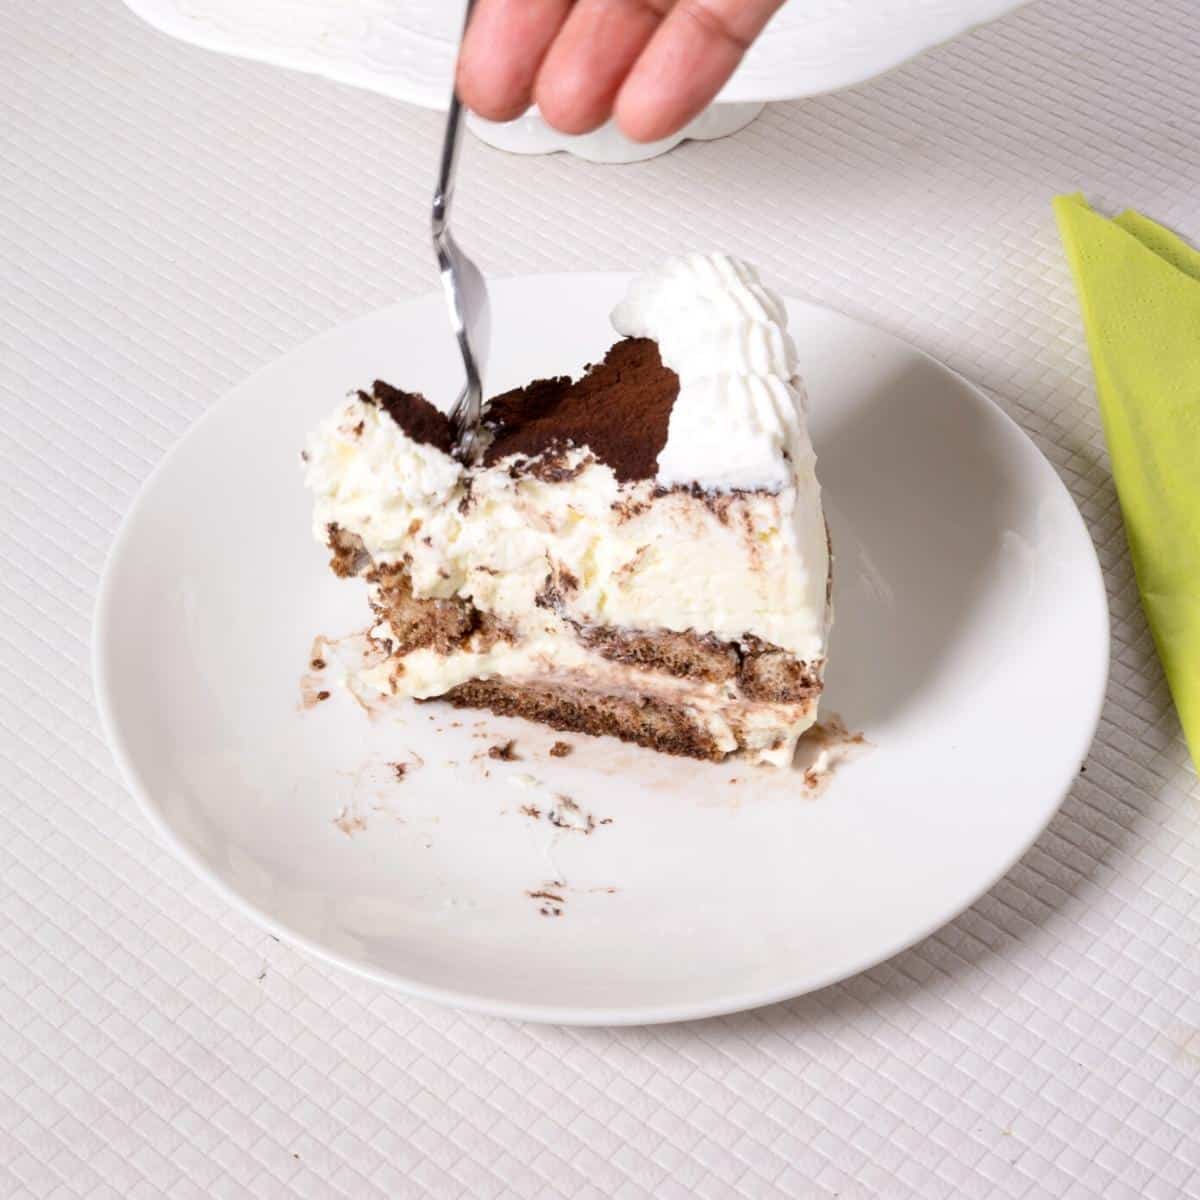 A slice of cake and fork.